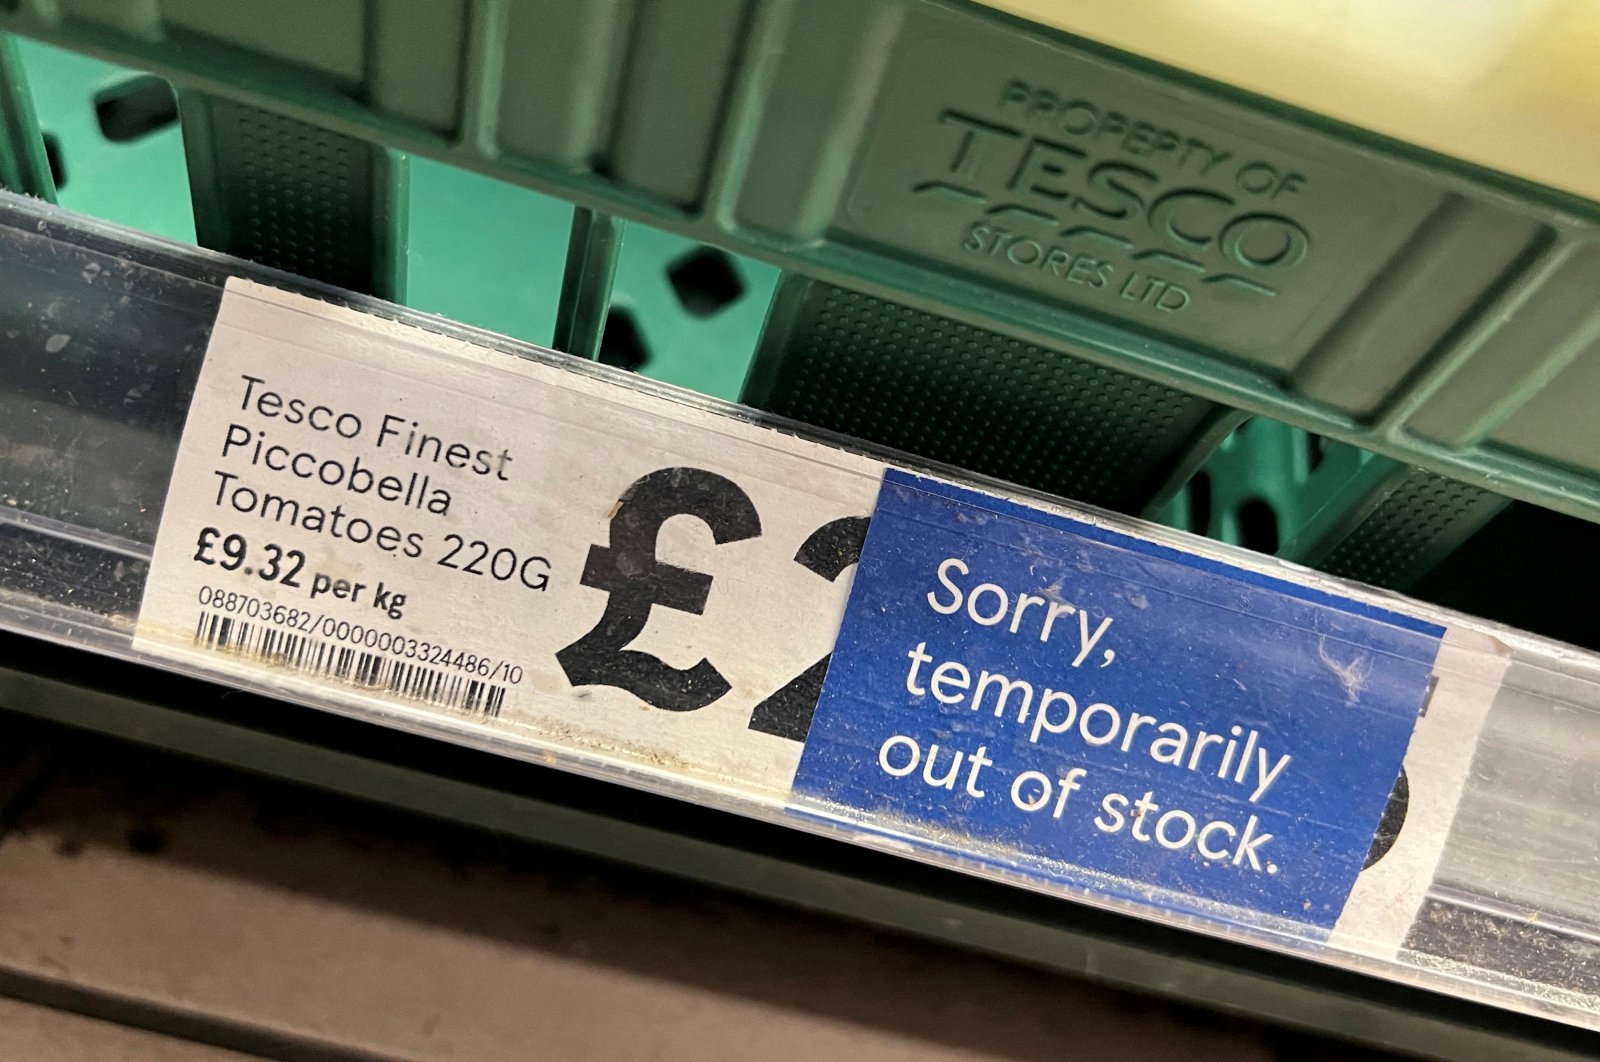 Empty tomato section is seen on shelves at Tesco supermarket in London, Britain, Feb. 21, 2023. (Reuters Photo)